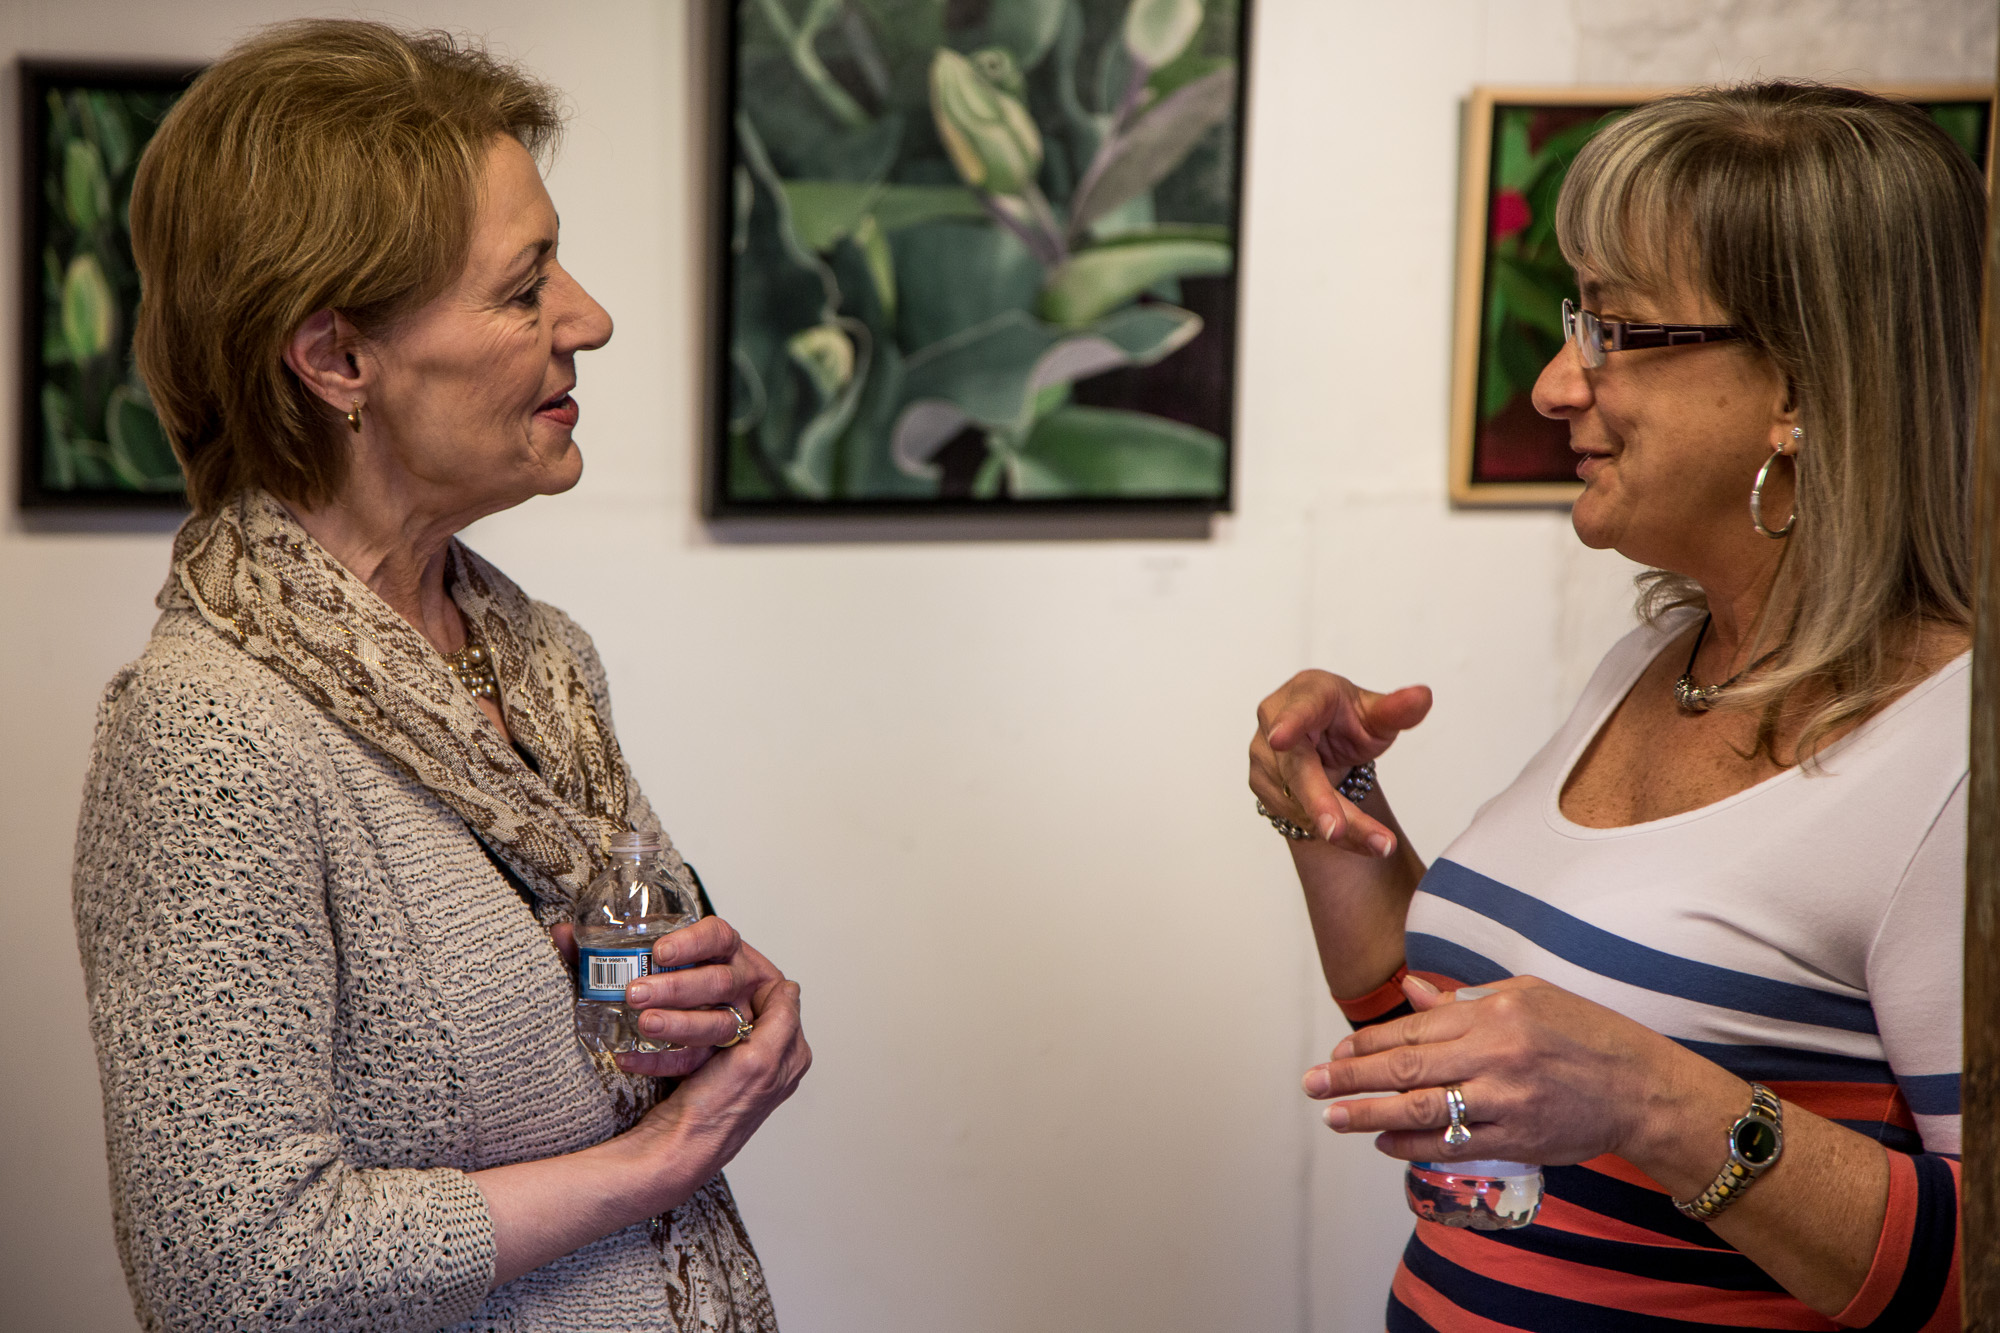 Kathy Guzman with a visitor in her Member's Gallery exhibit